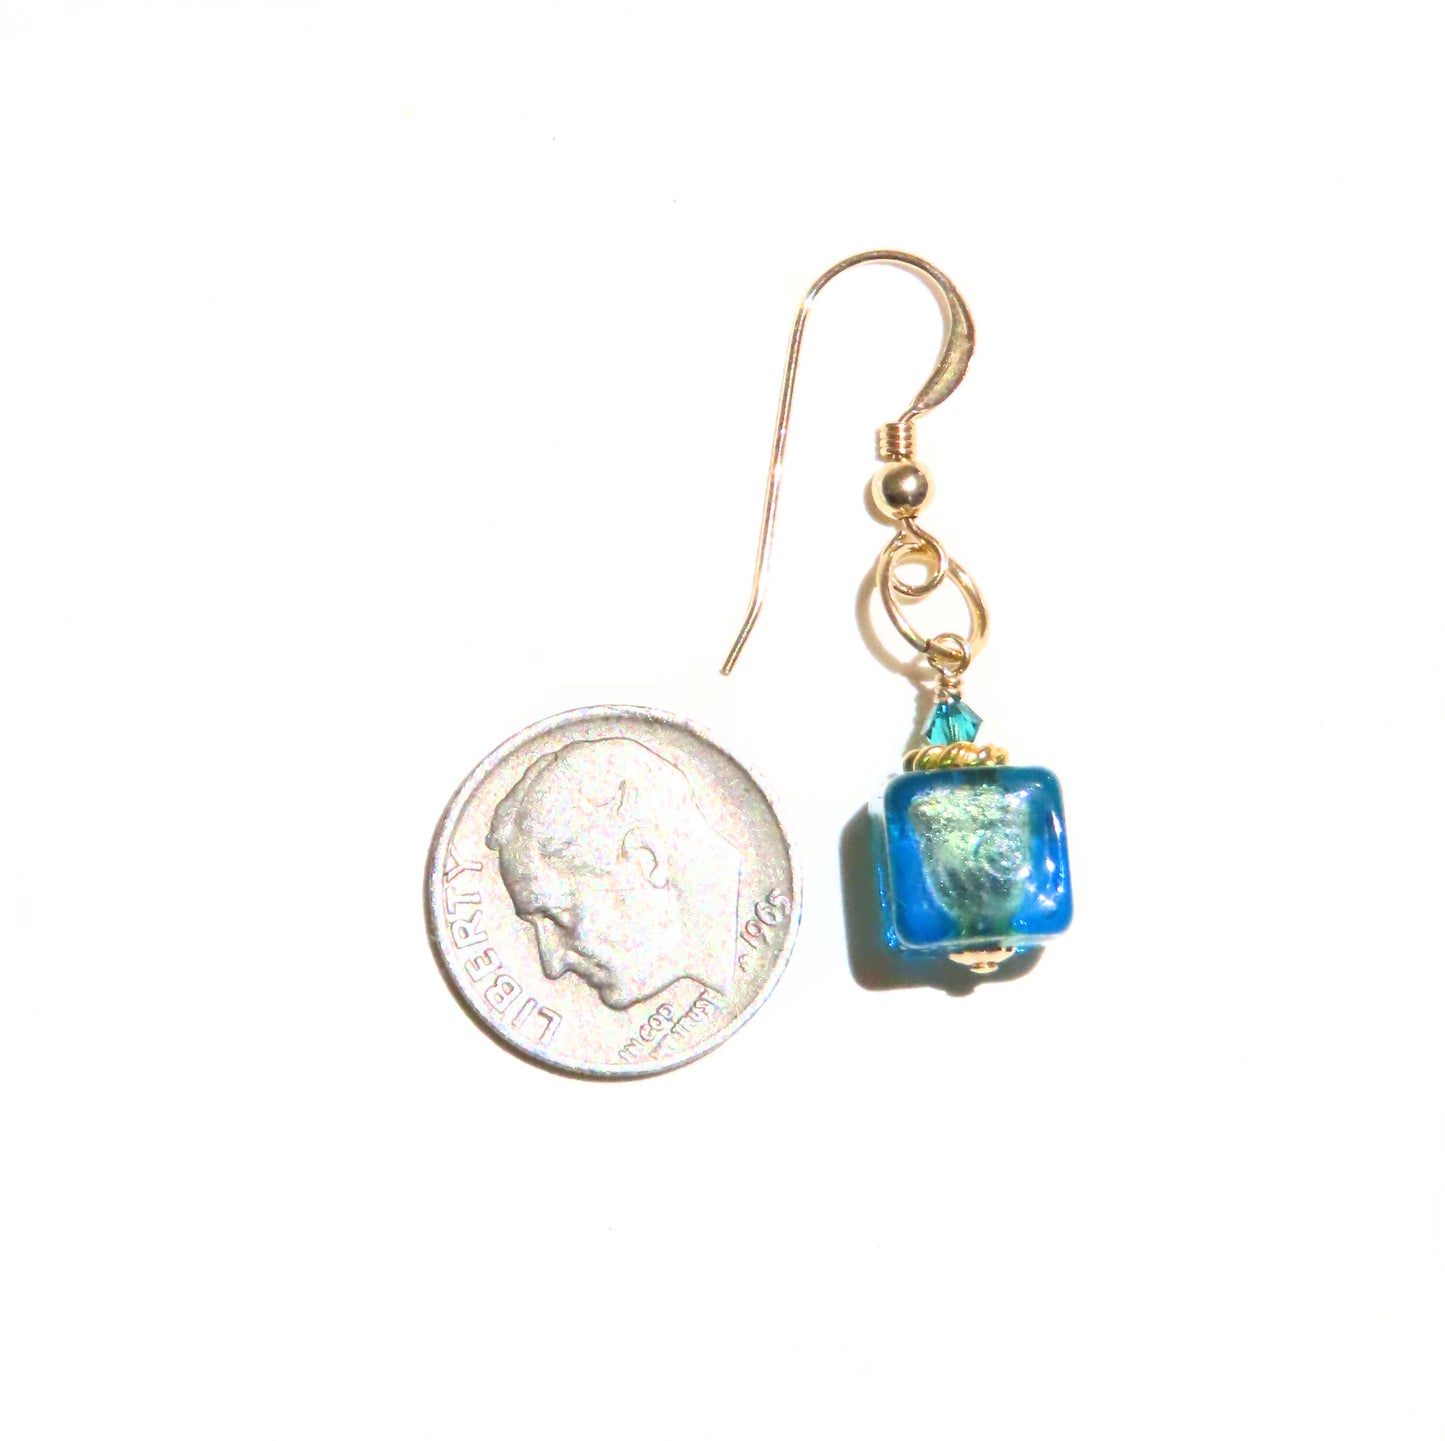 a pair of earrings with a coin hanging from it